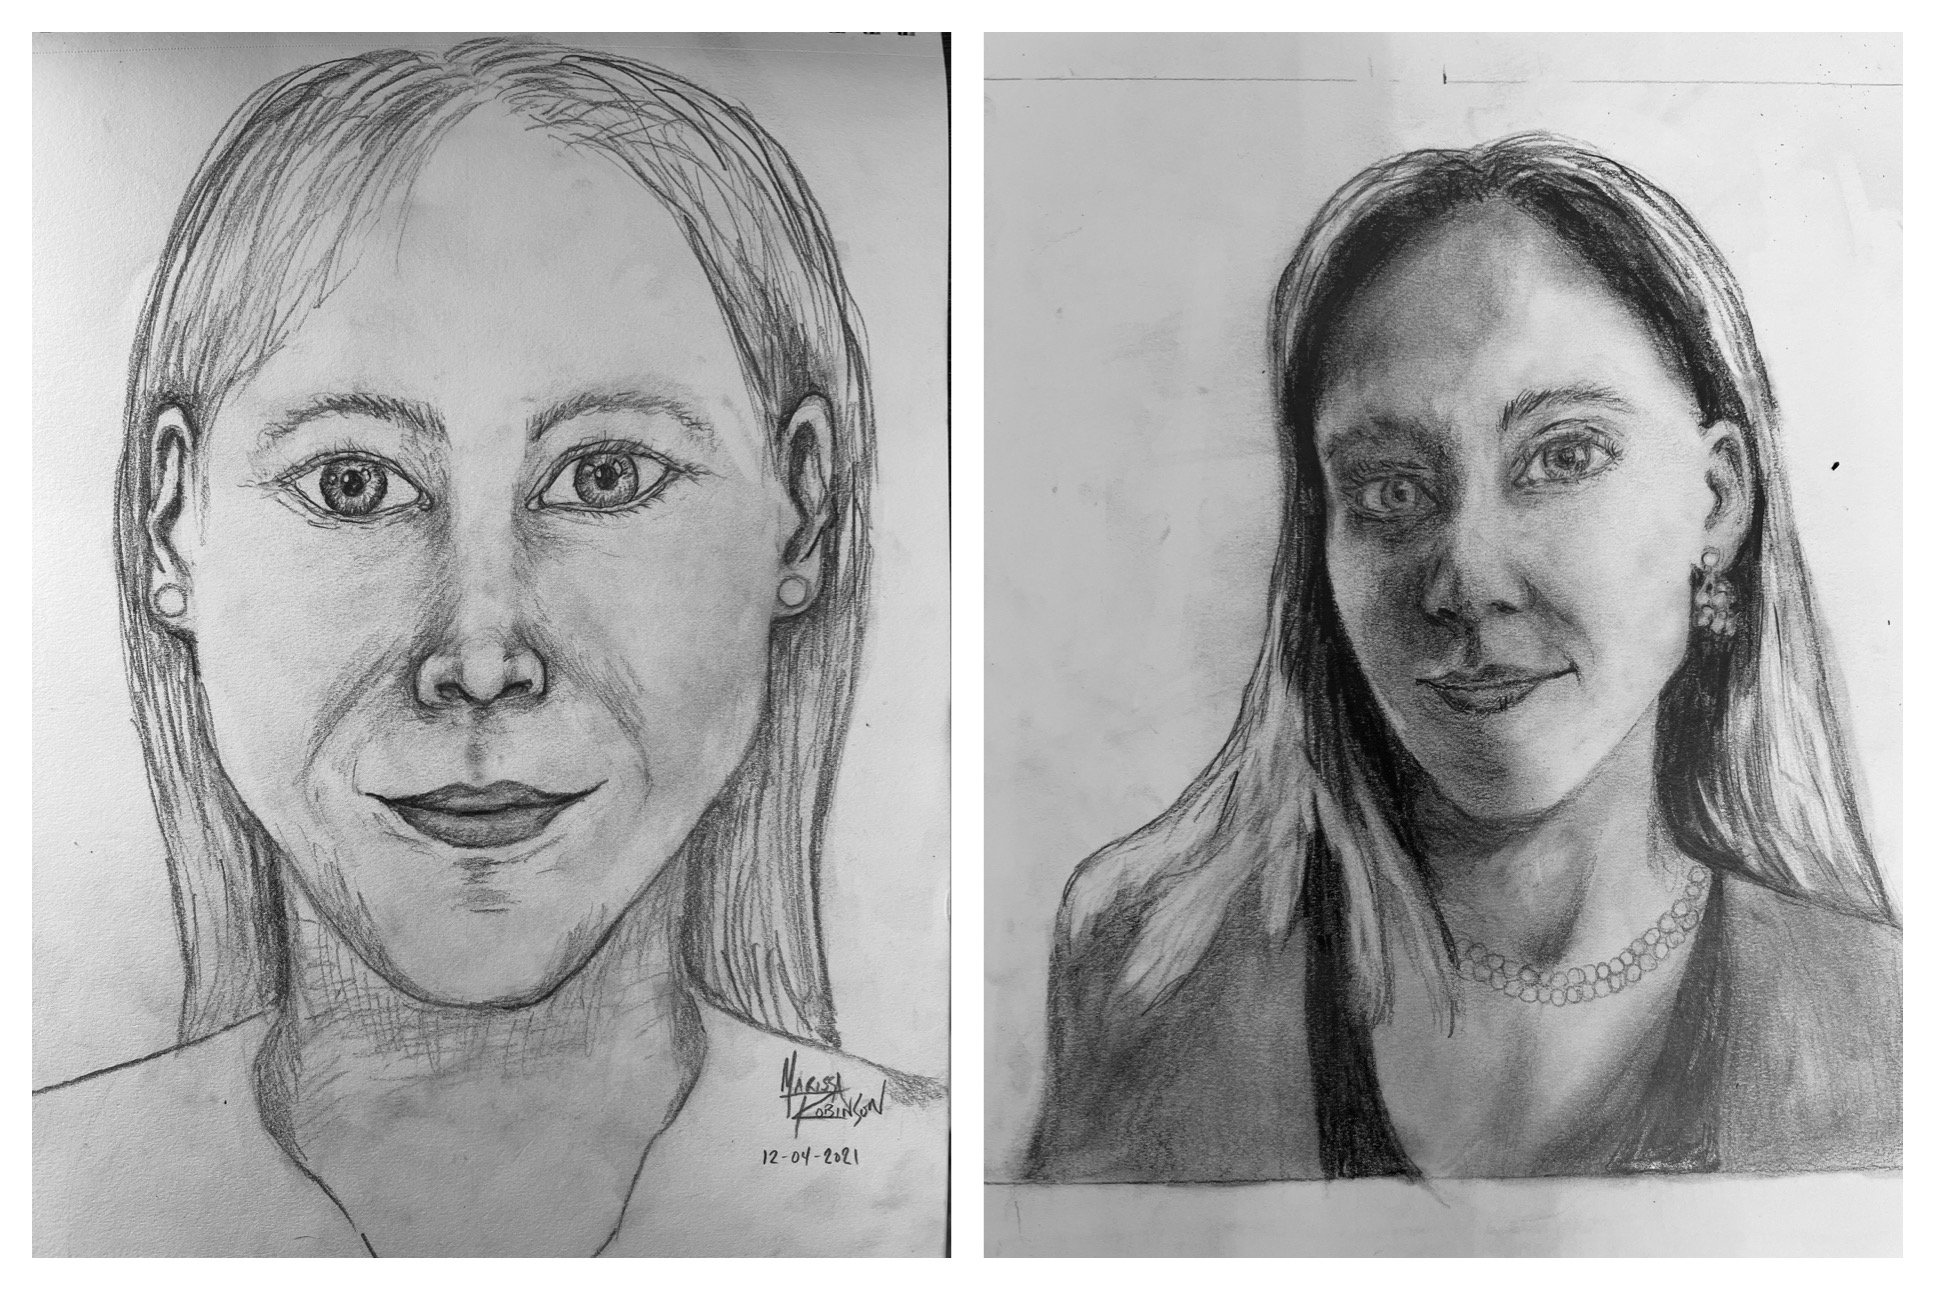 Marissa's Before and After Self-Portrait Drawings December 6-11. 2021